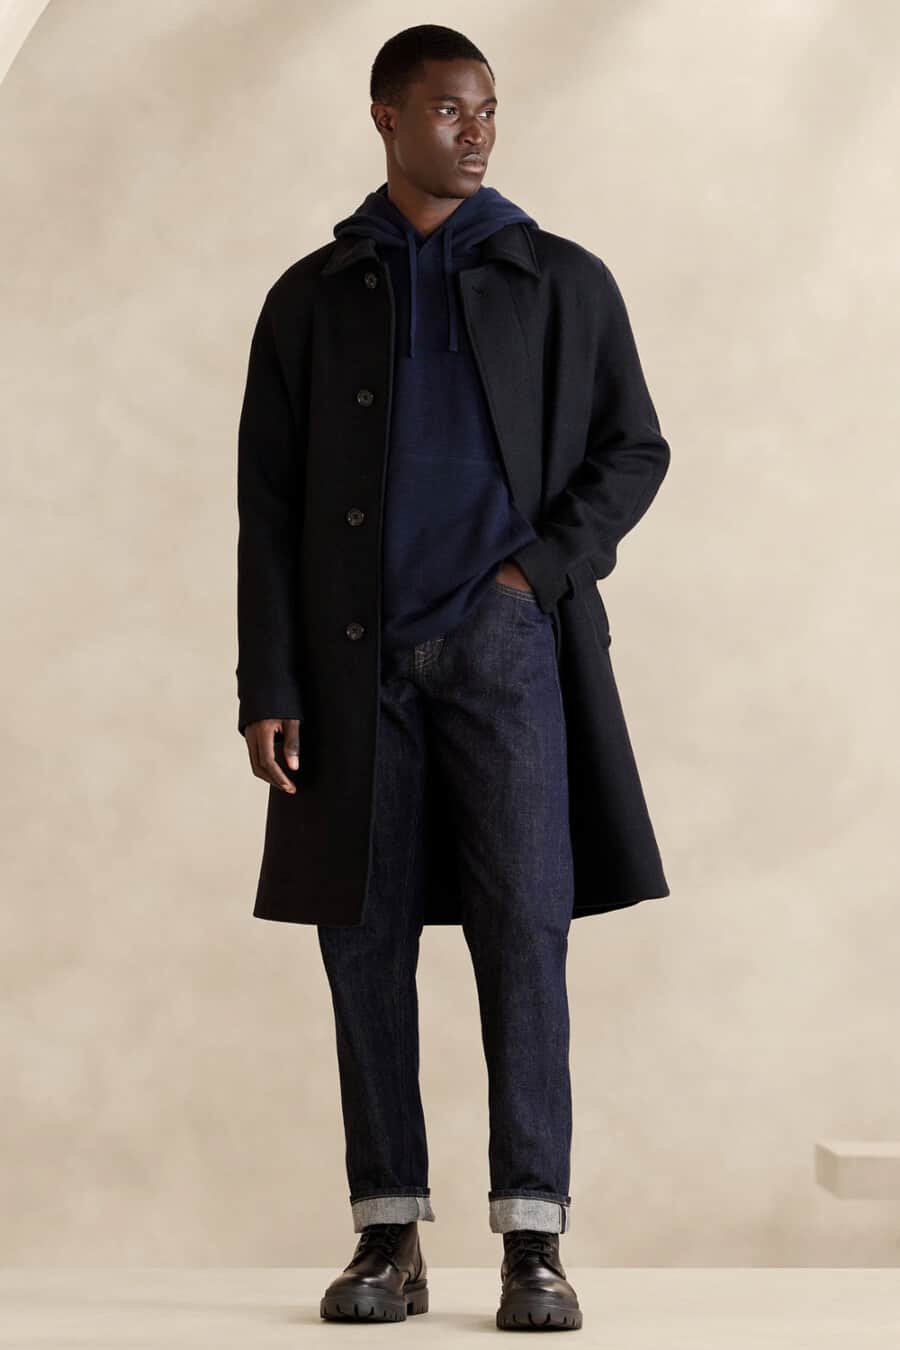 Men's blue raw selvage denim jeans, navy hoodie, navy overcoat and black leather boots outfit